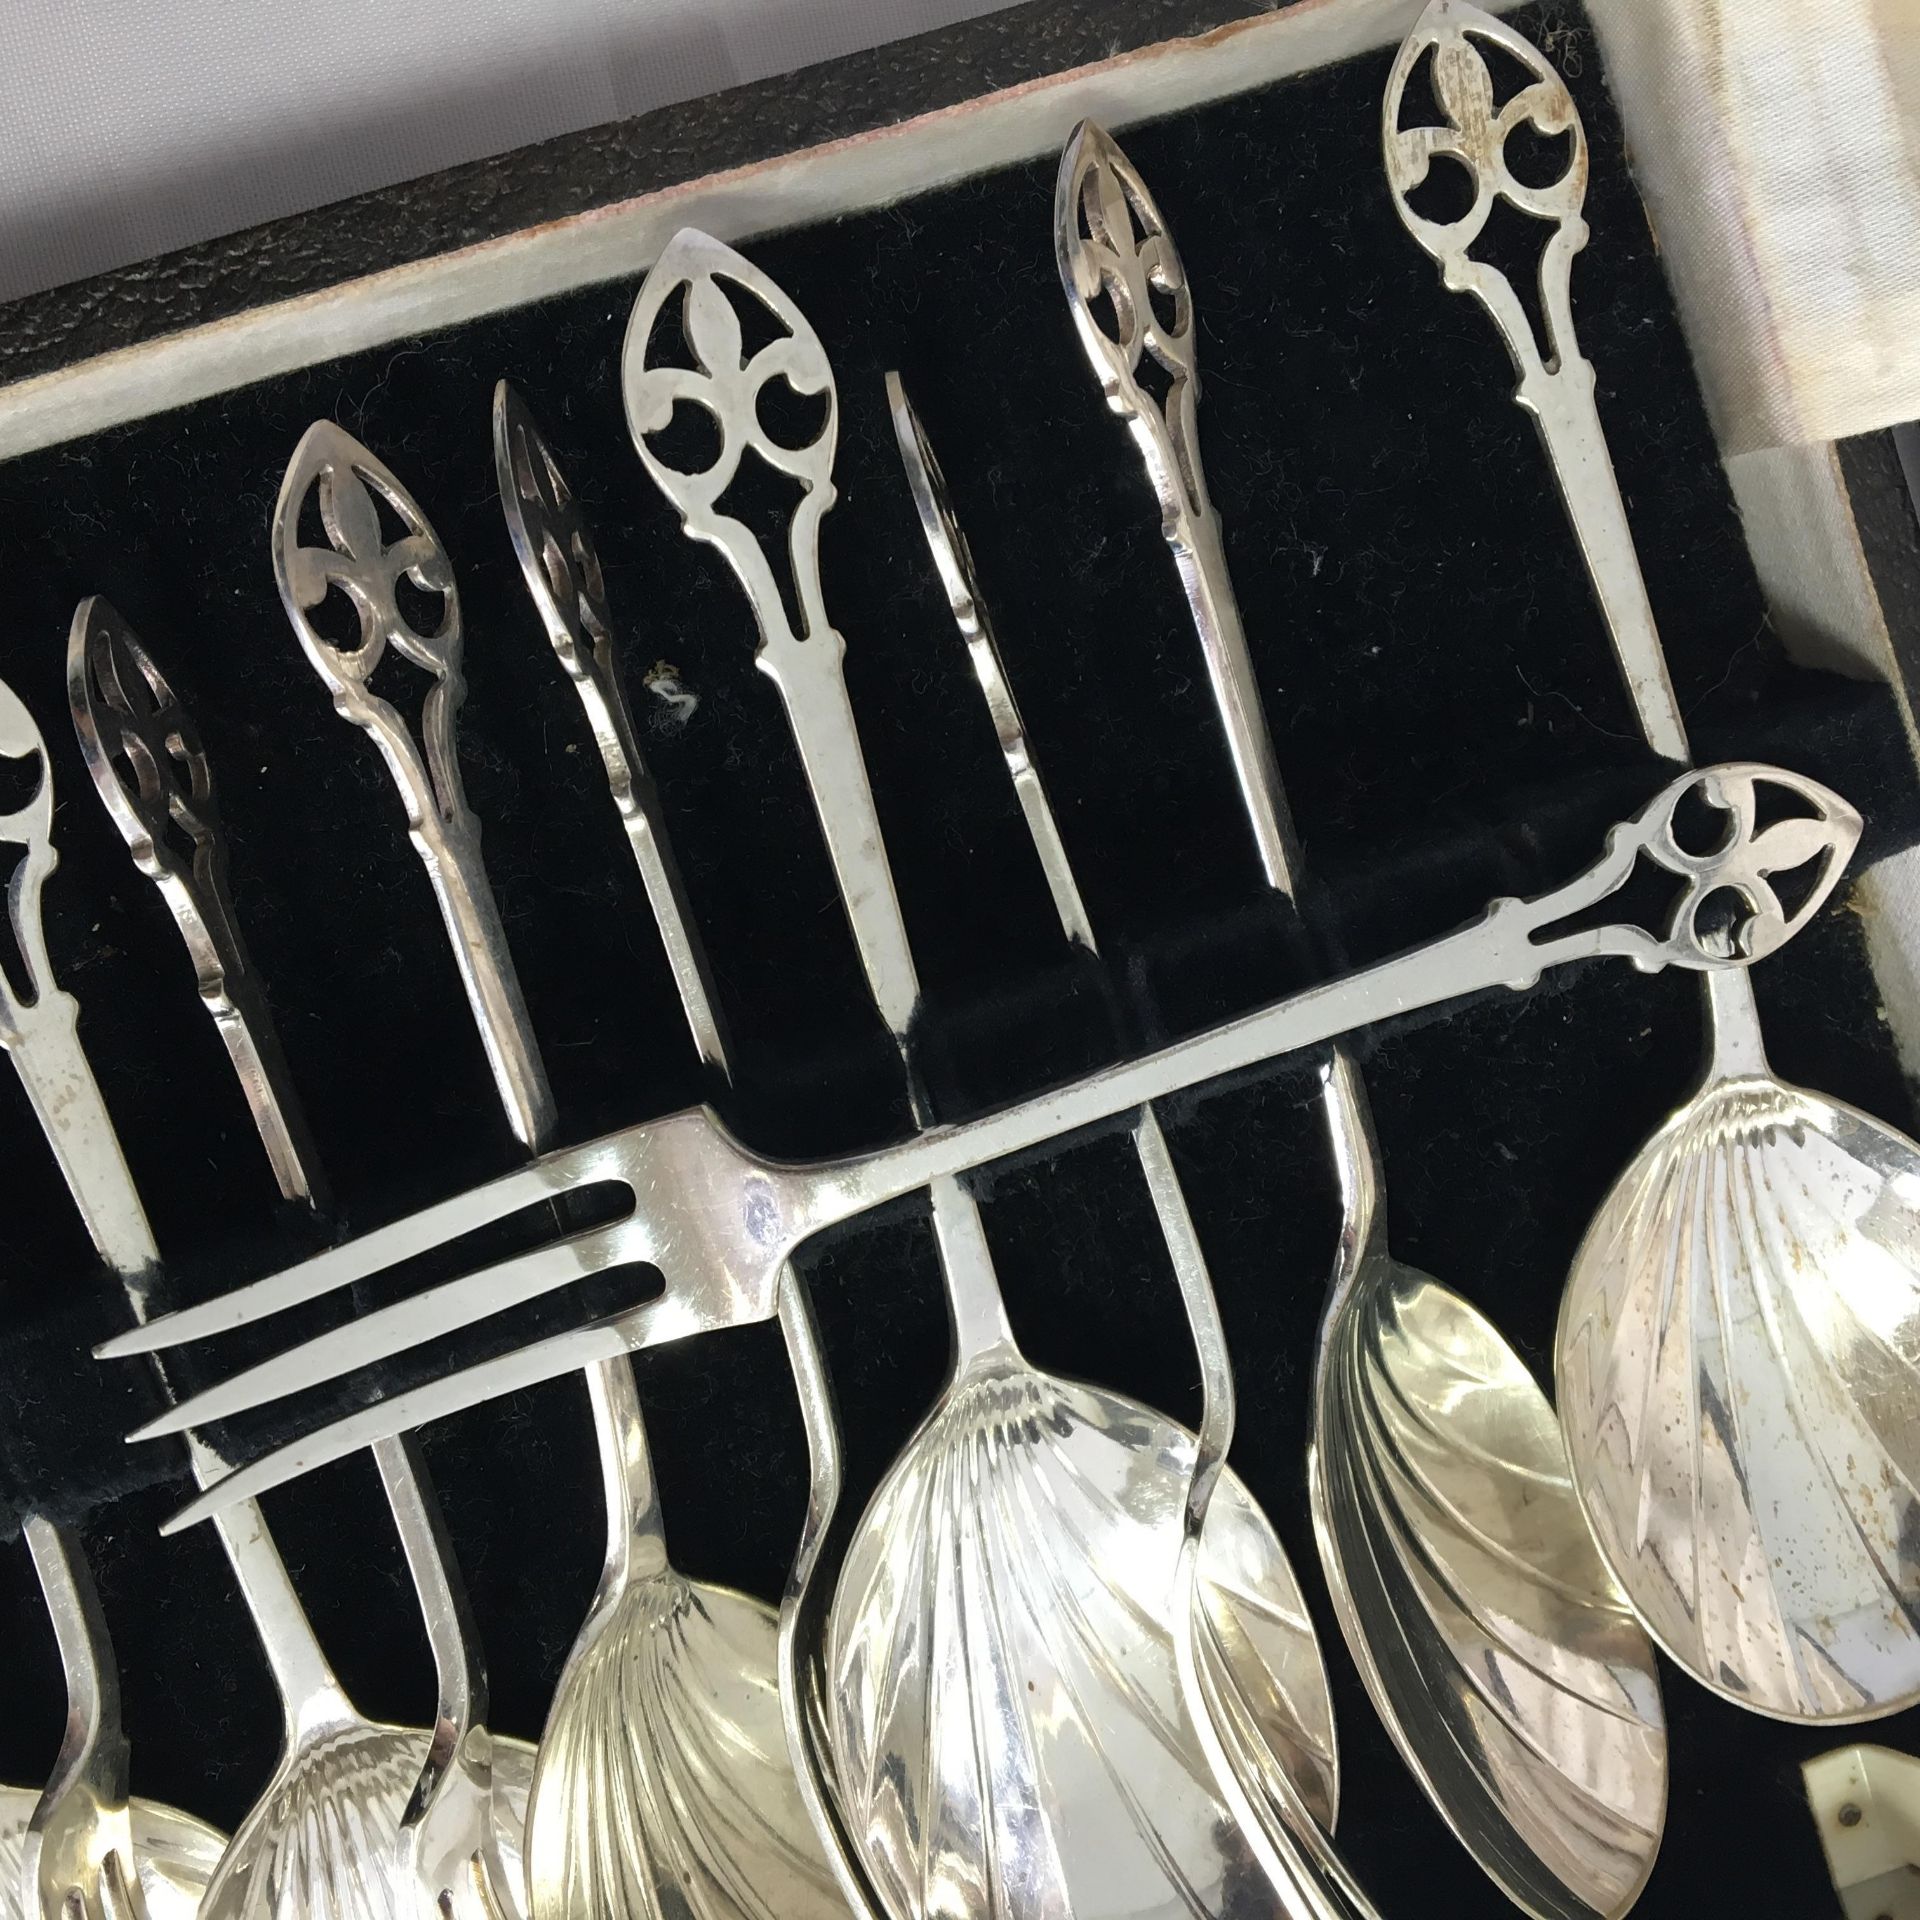 A UNIQUE BOXED CUTLERY SET BY FIRTH'S OF SHEFFIELD OFFERING 18 PIECES OF STUNNING DESIGN. FREE UK - Image 2 of 2